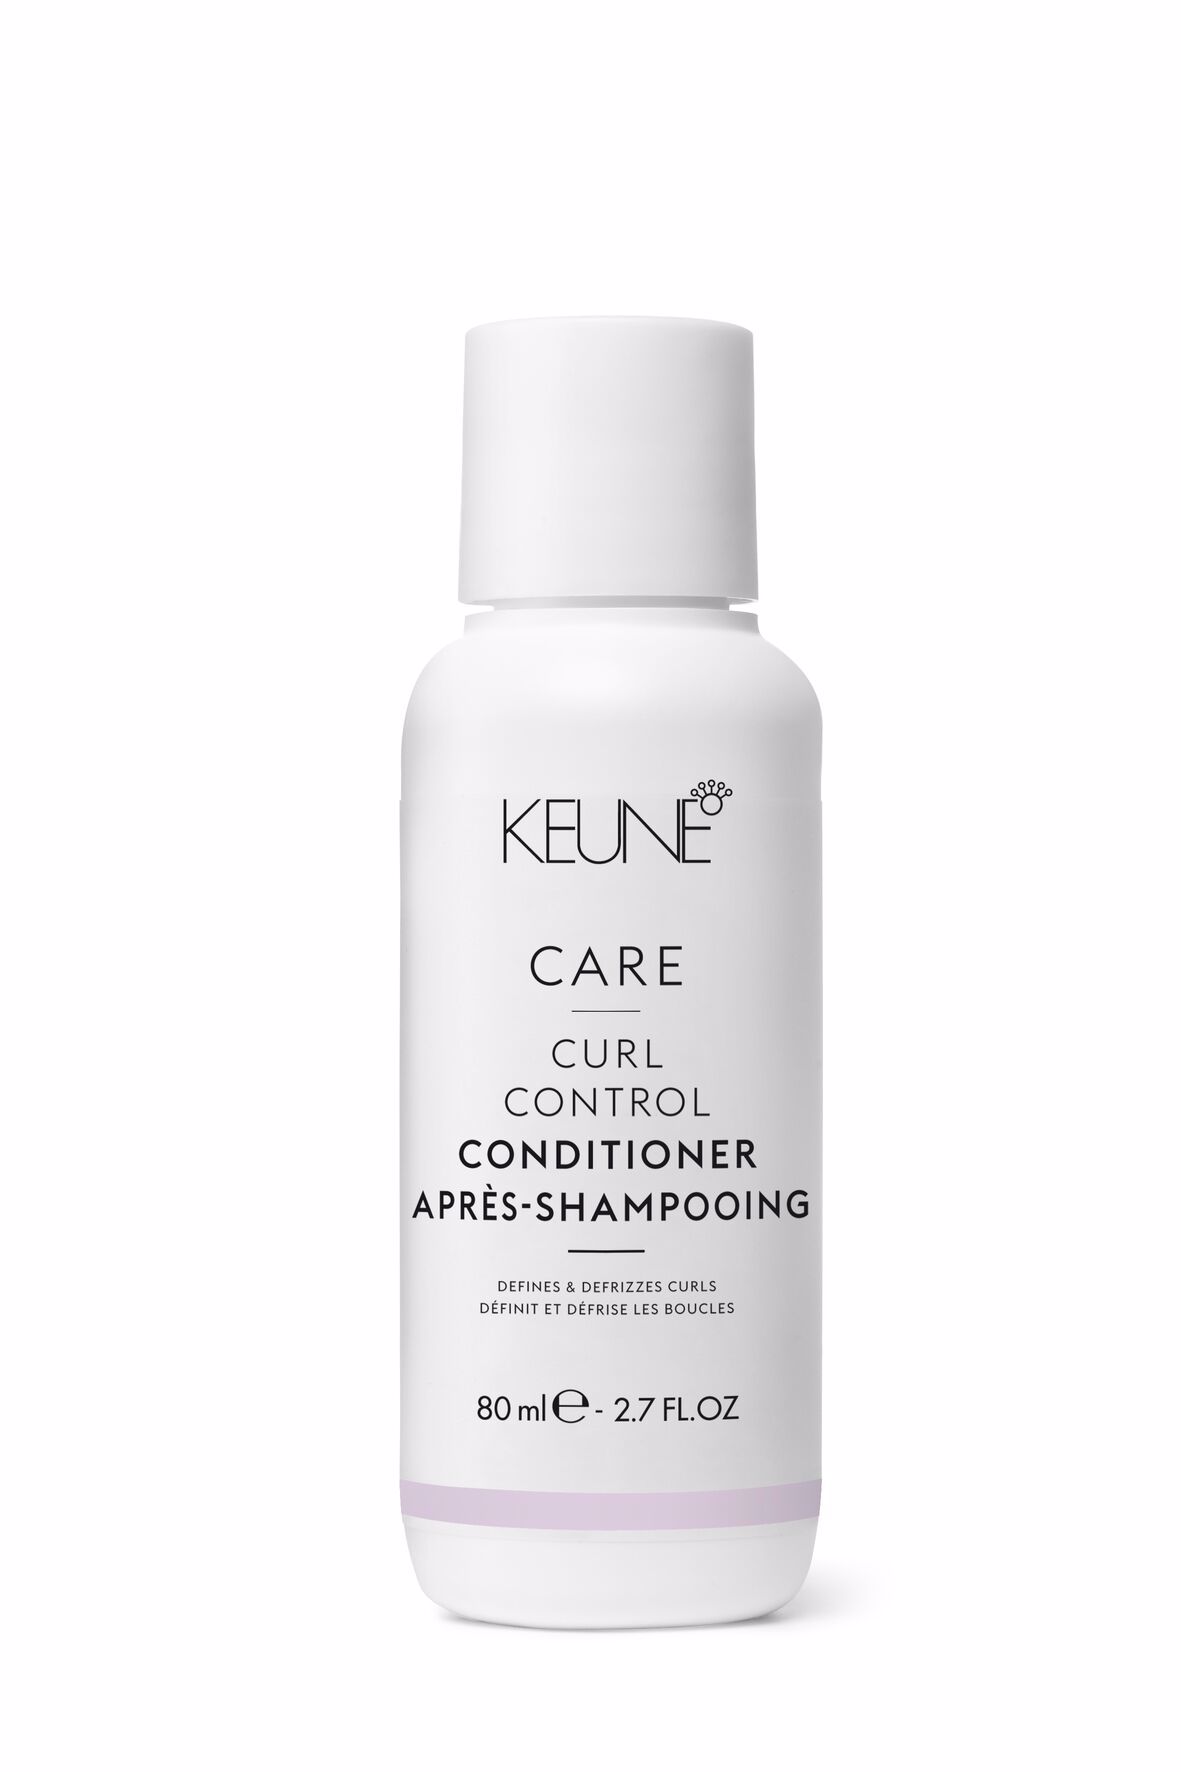 Discover Care Curl Control Conditioner for frizz-free, beautiful curls. Deep hydration and optimal frizz protection. Now available on keune.ch.